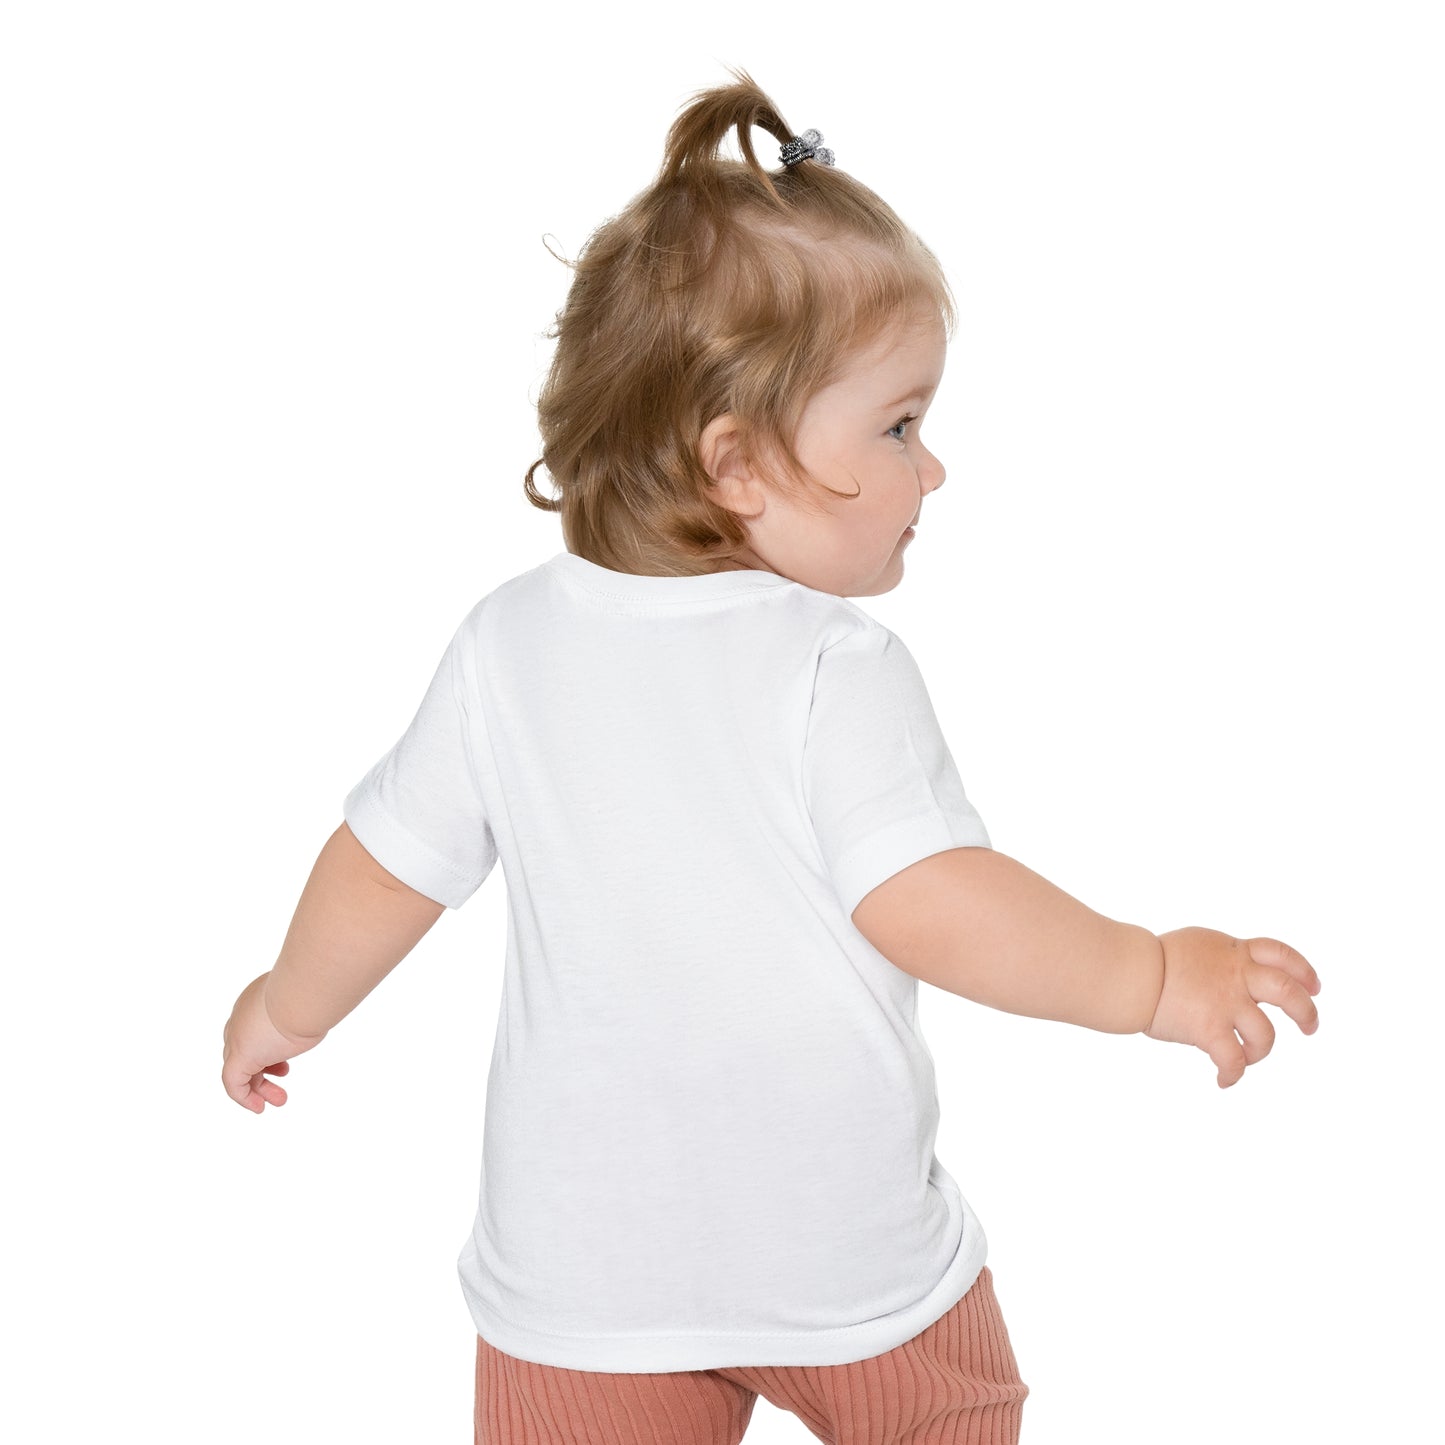 Baby Short Sleeve T-Shirt " All Aboard The Snuggle Bus"